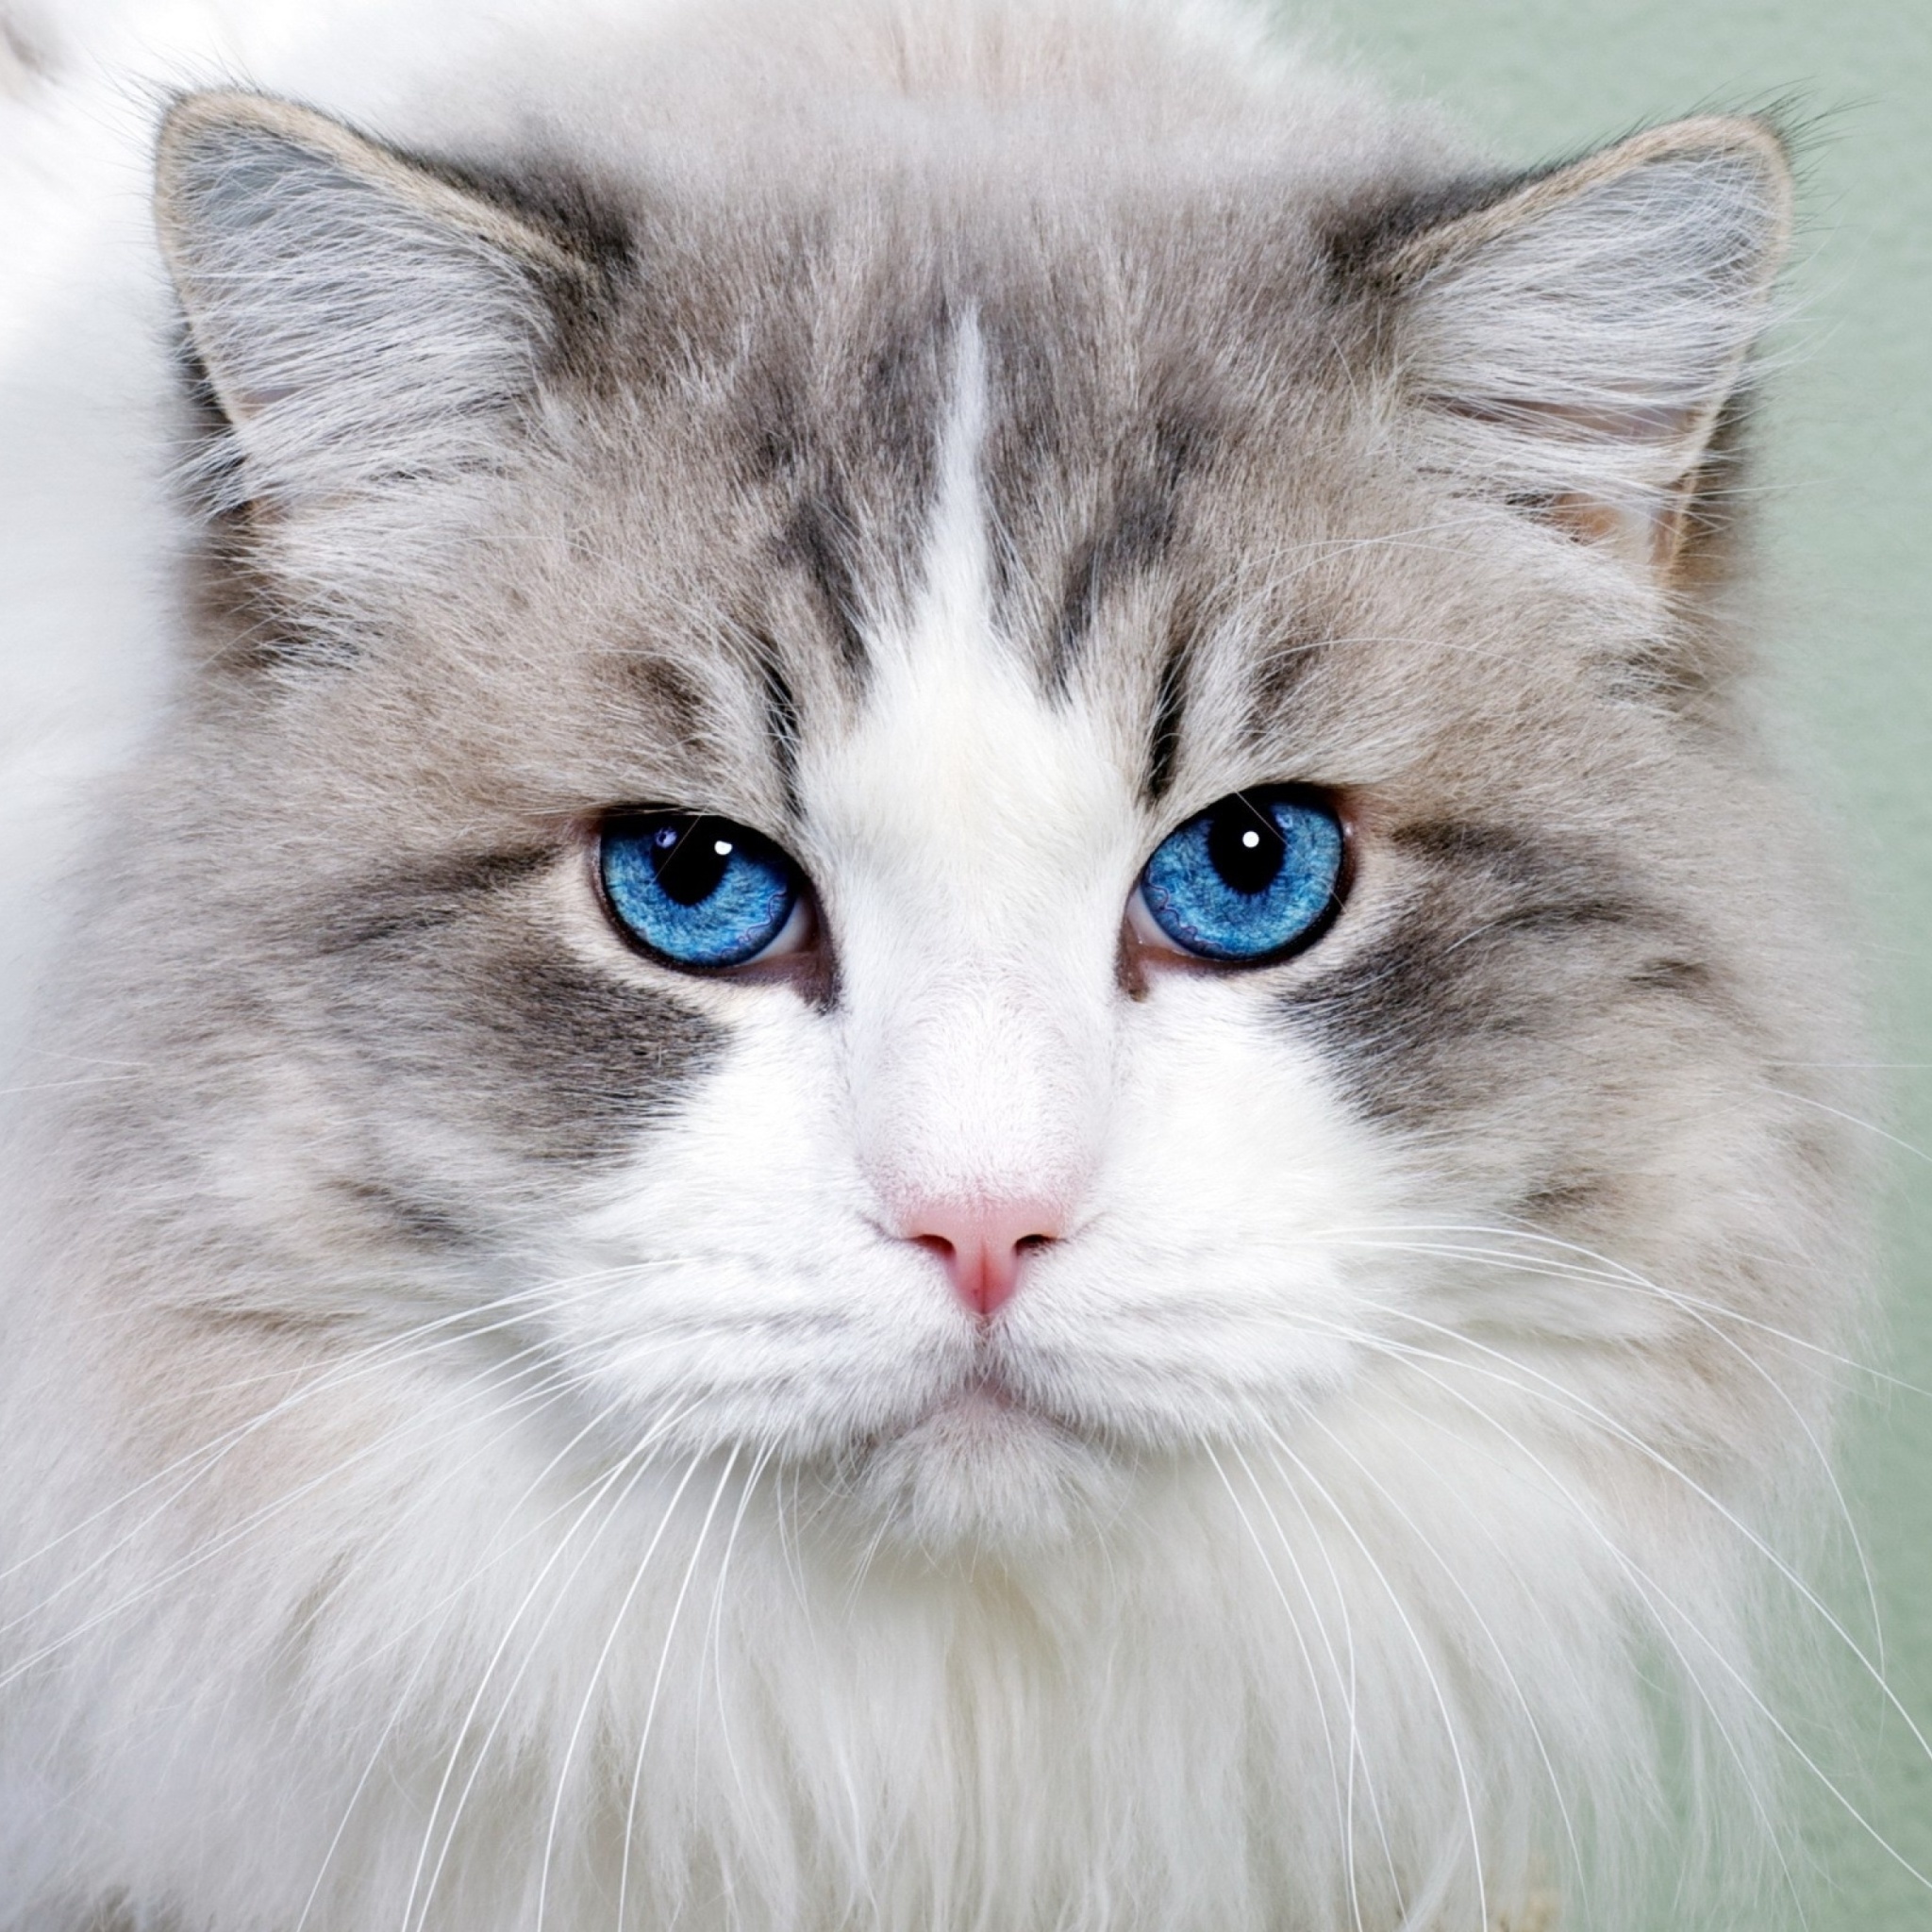 Cat with Blue Eyes wallpaper 2048x2048